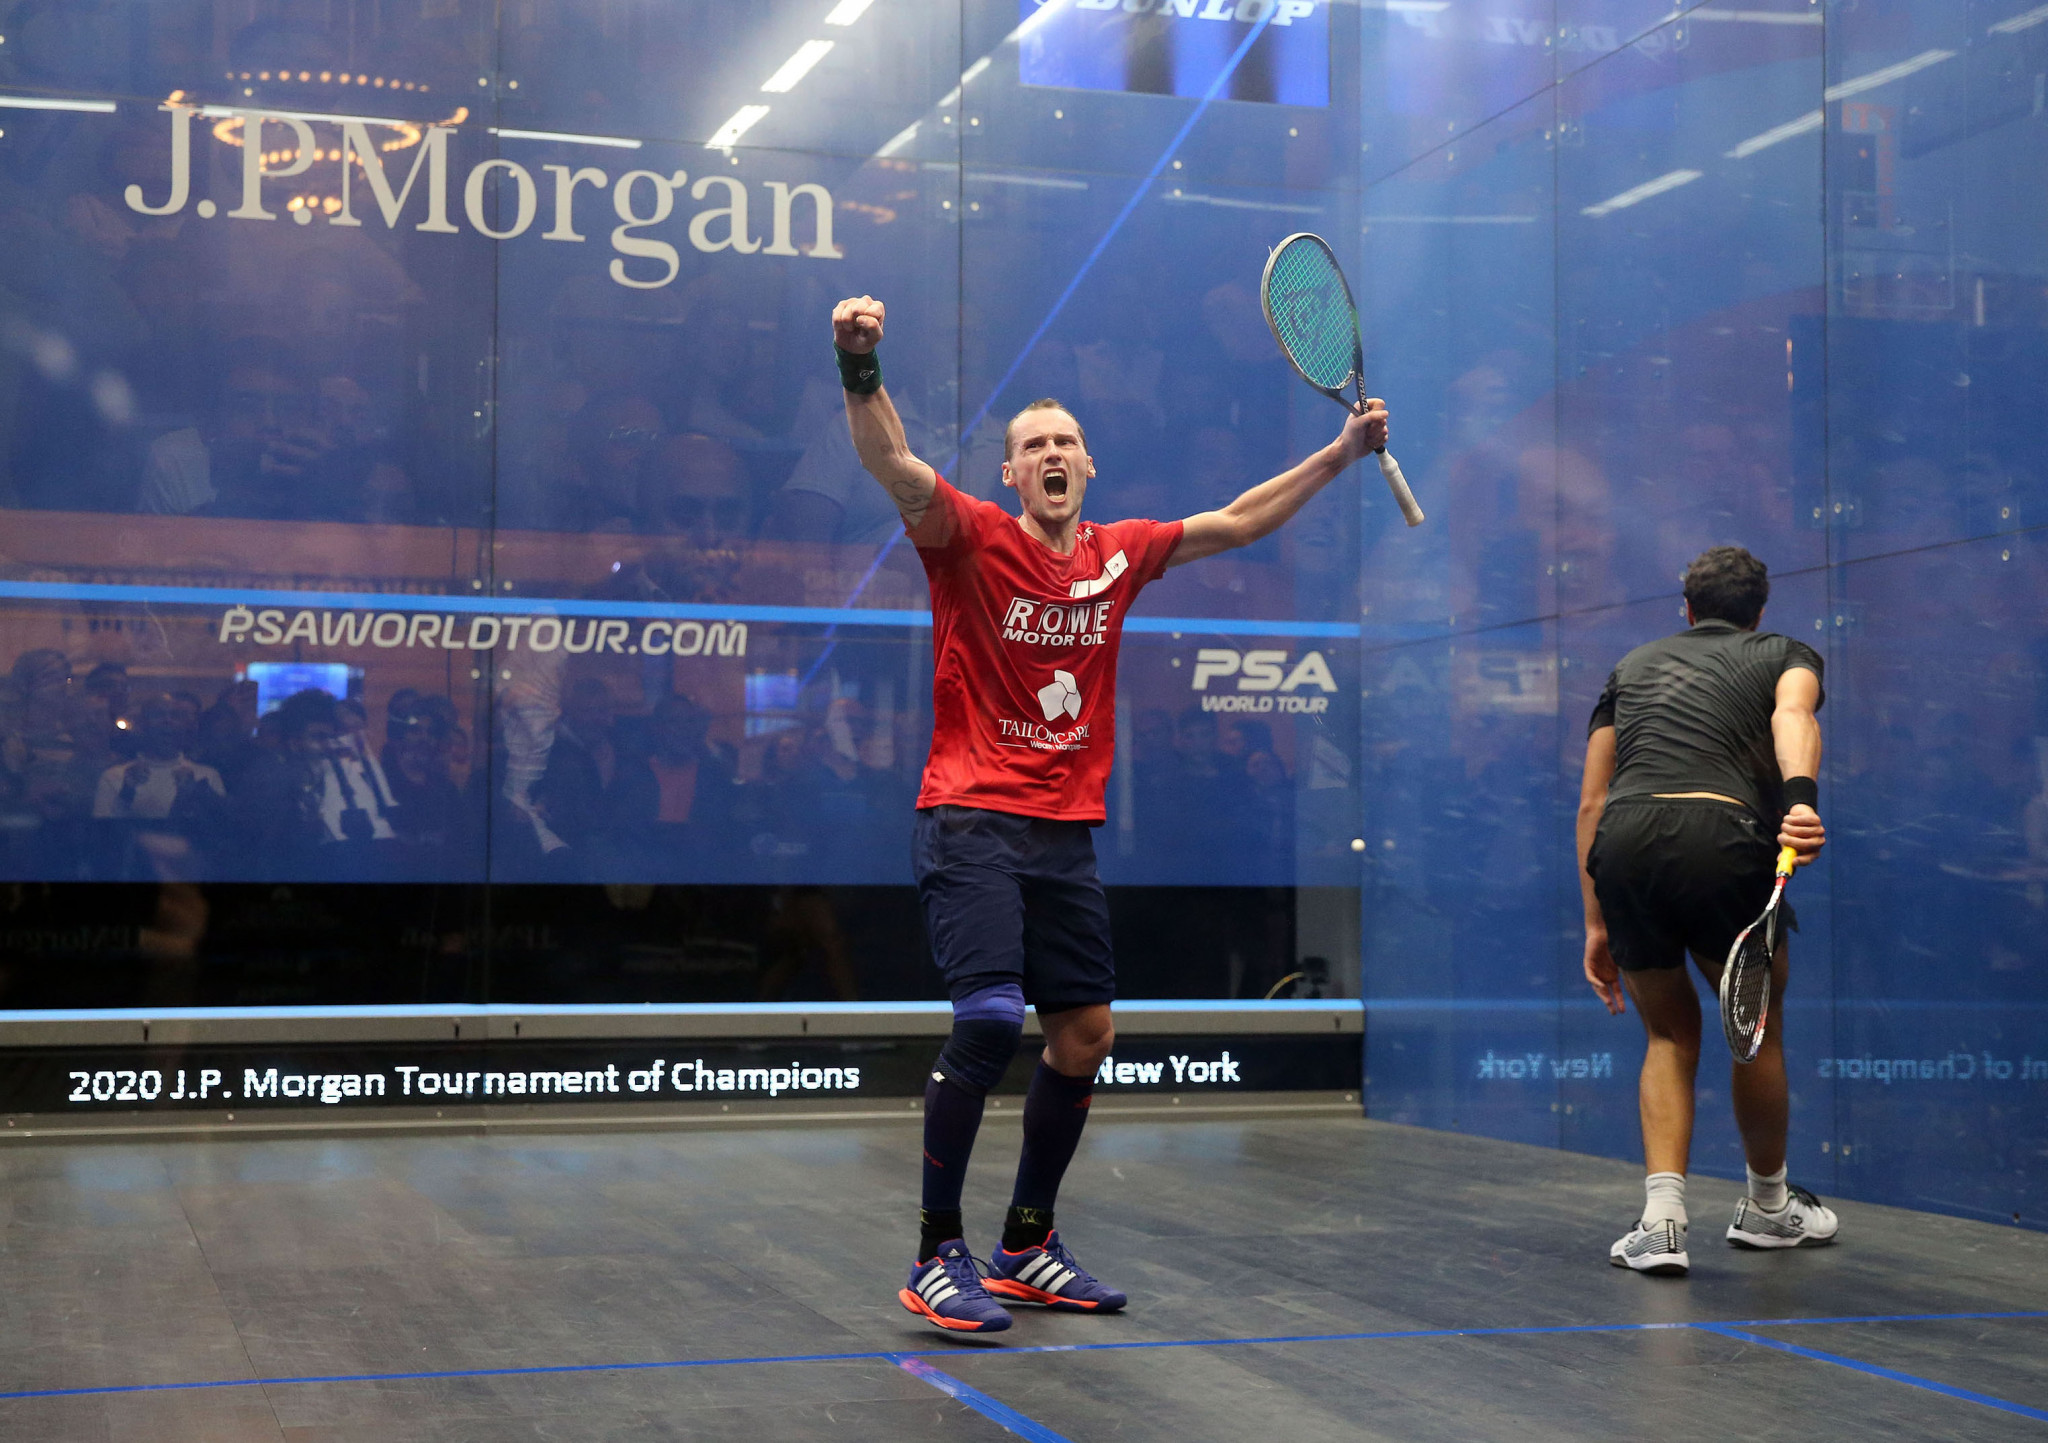 Gaultier, 37, beats world number three in PSA World Tour comeback